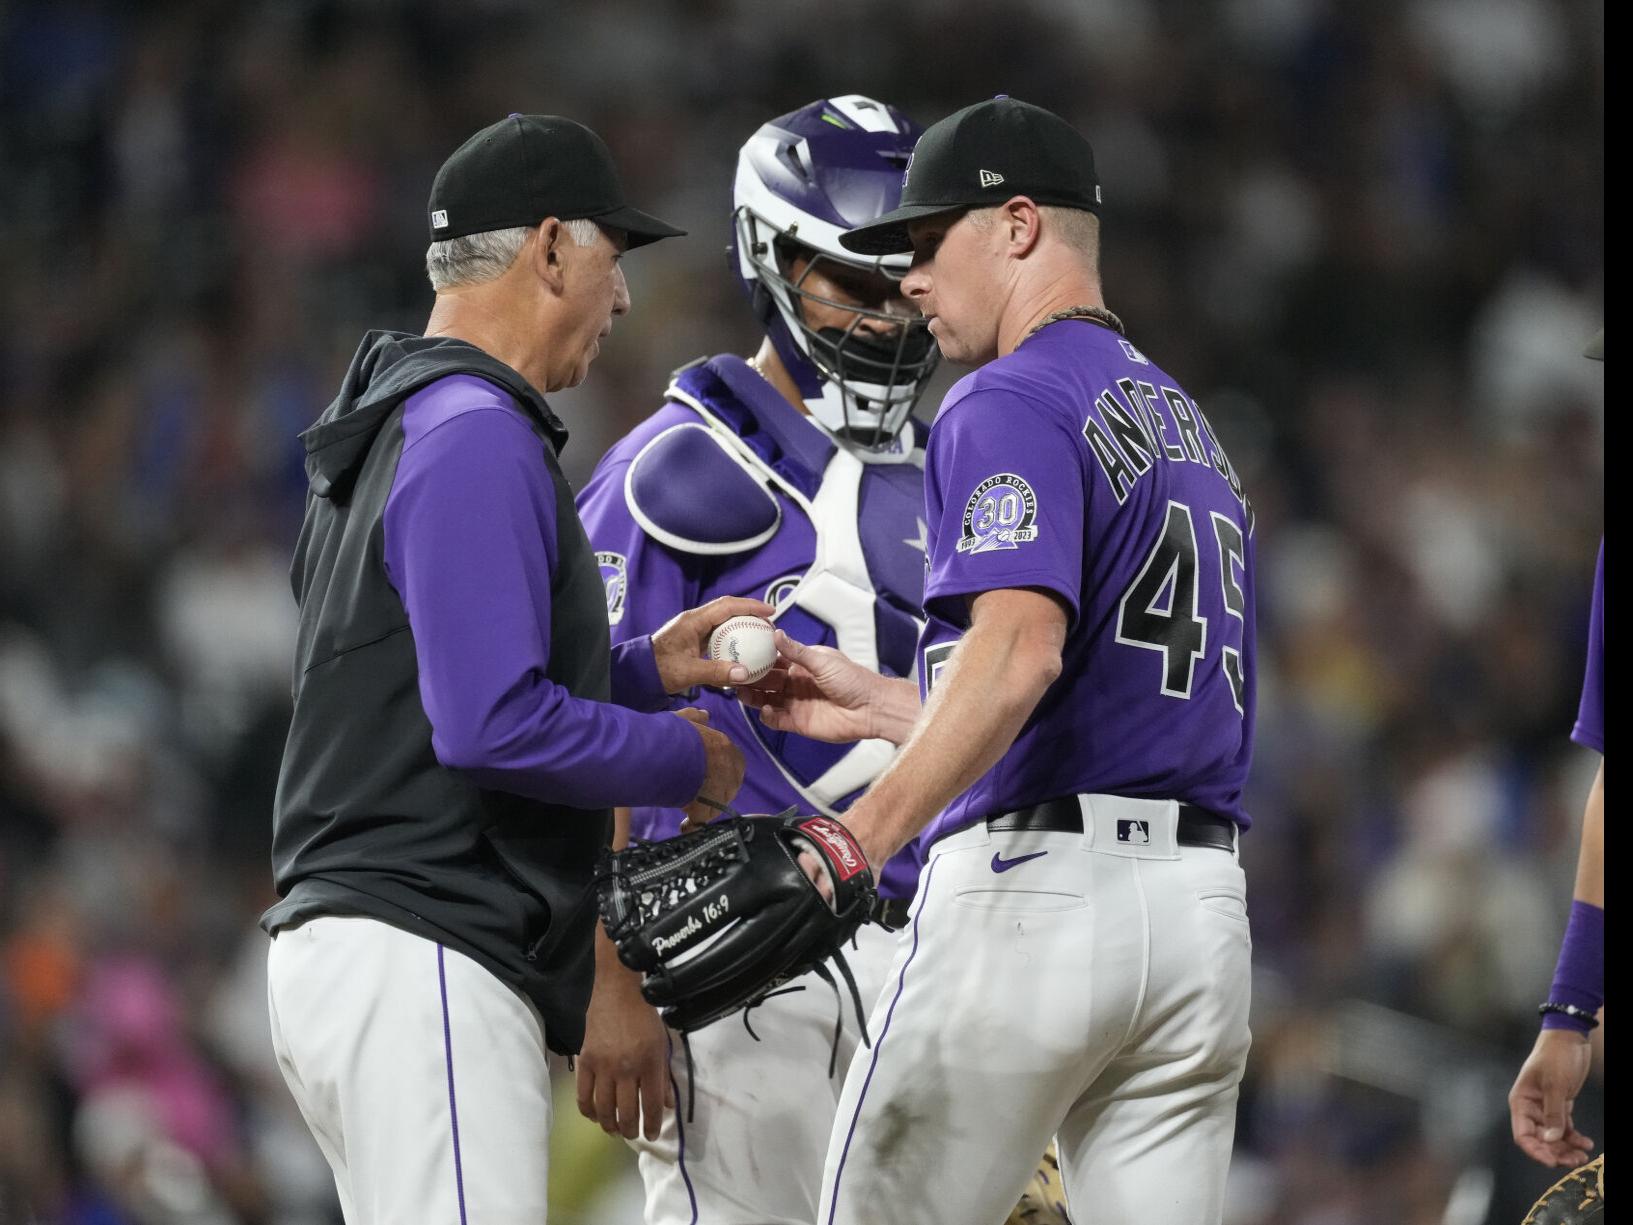 Rockies' Austin Gomber, so good at Coors Field last year, roughed up by Cubs